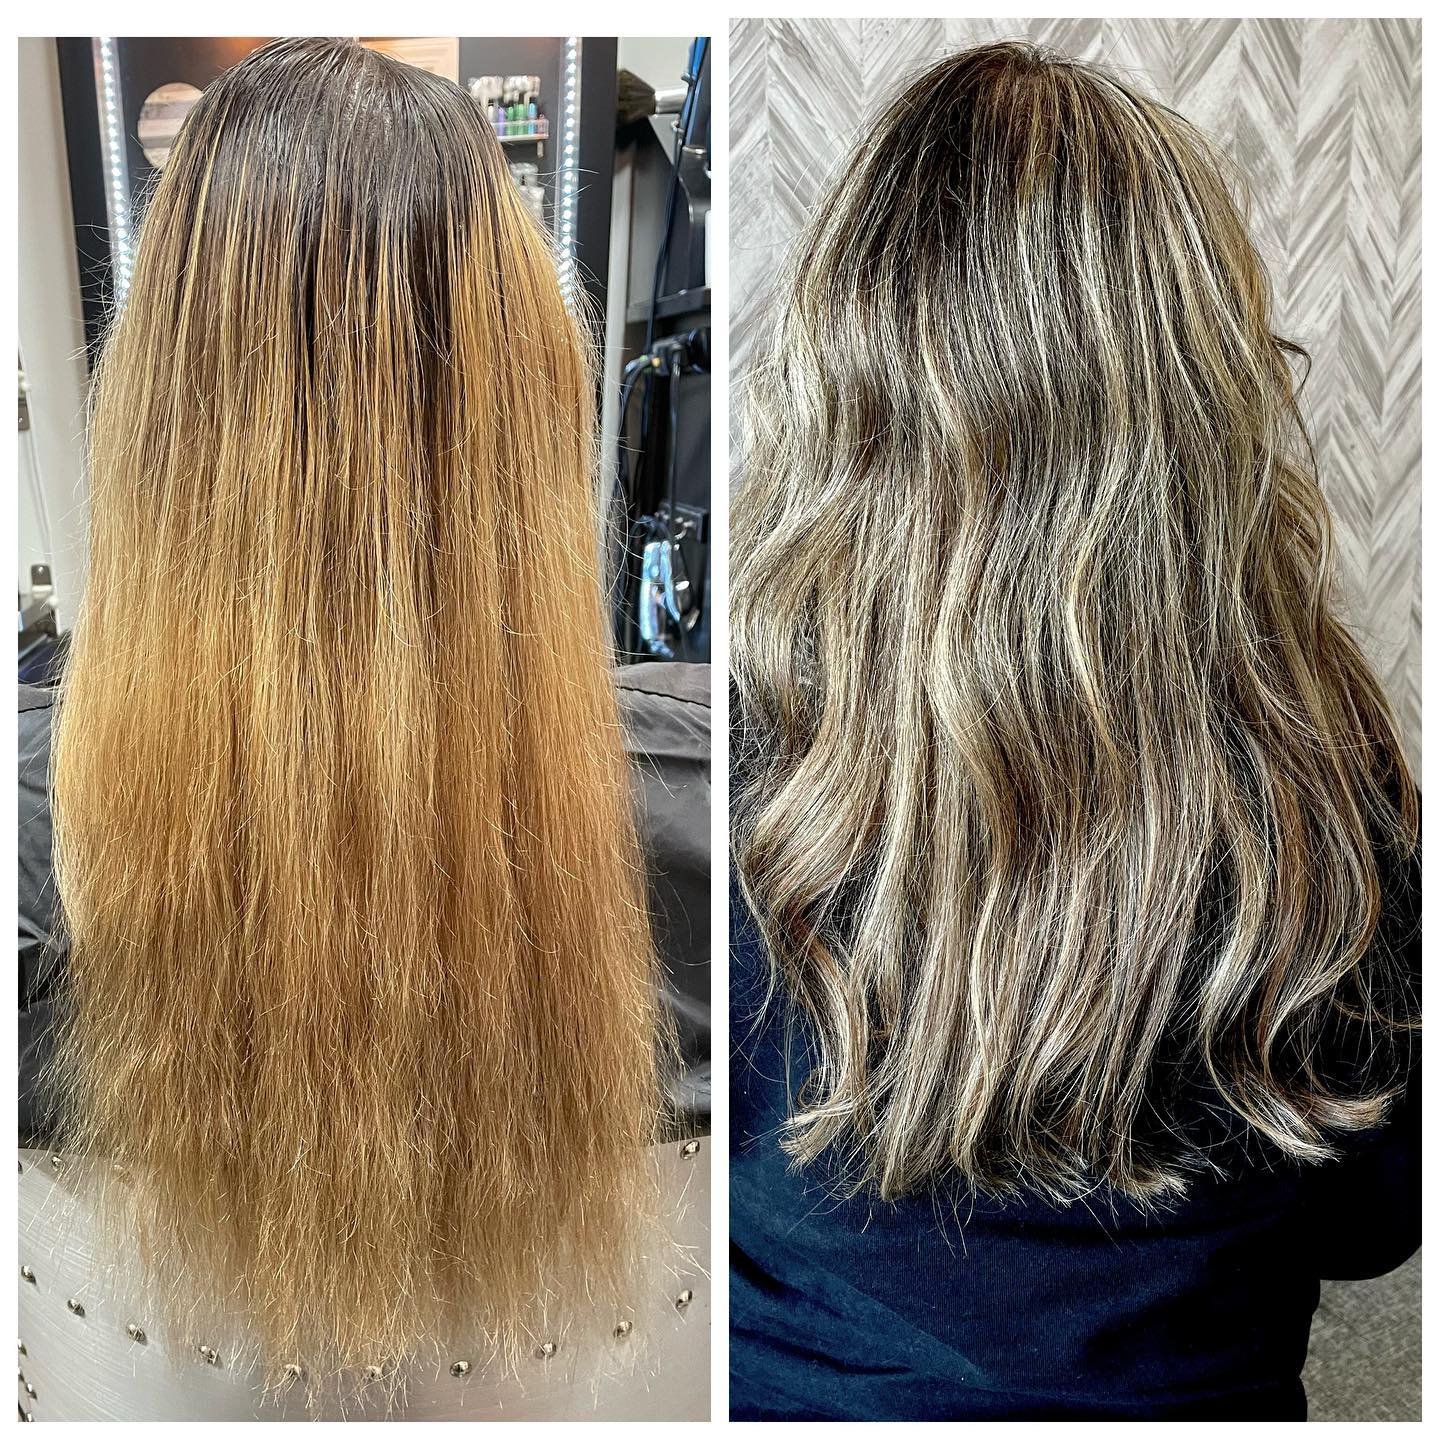 It&rsquo;s been 7 months since Cindy has touched her good friends Liz&rsquo;s hair. (My Cabo Sister) ❤️ So it&rsquo;s time for a total makeover!!! Cindy did a full head of highlights and low lights. Then an ash colored gloss to tone out the unwanted 